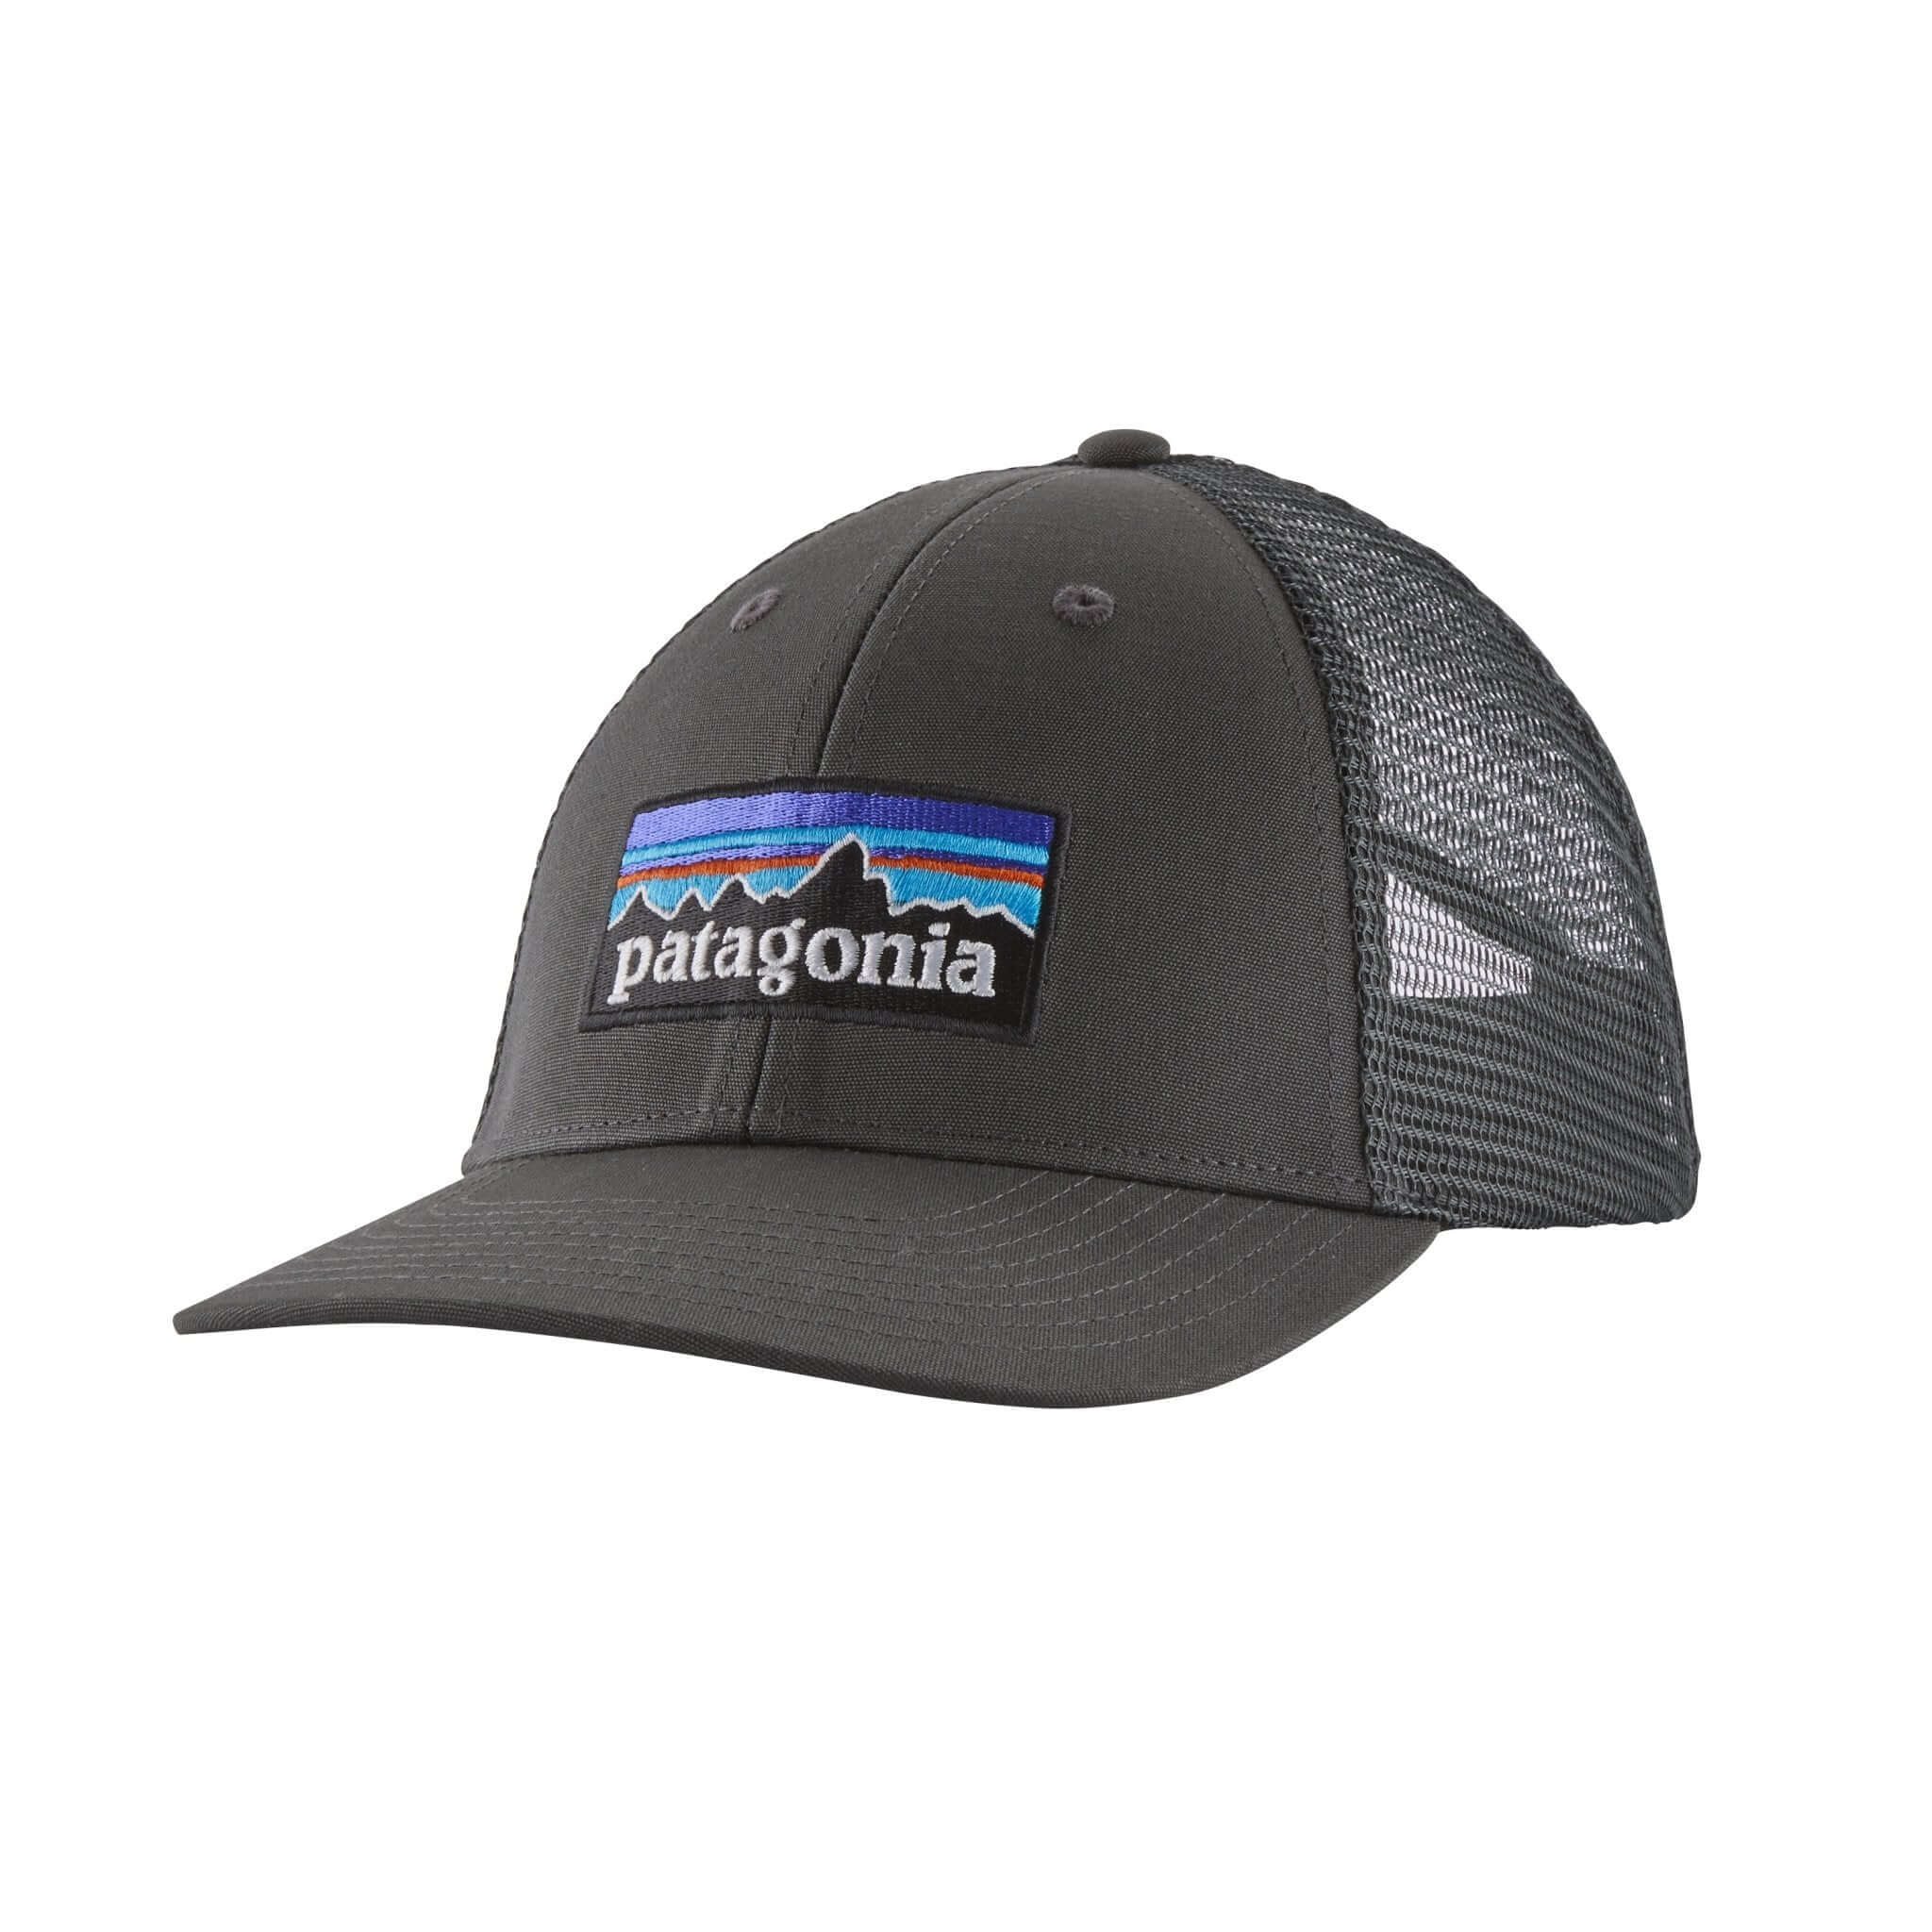 P - 6 Logo LoPro Trucker Hat in FORGE GREY | Patagonia Bend